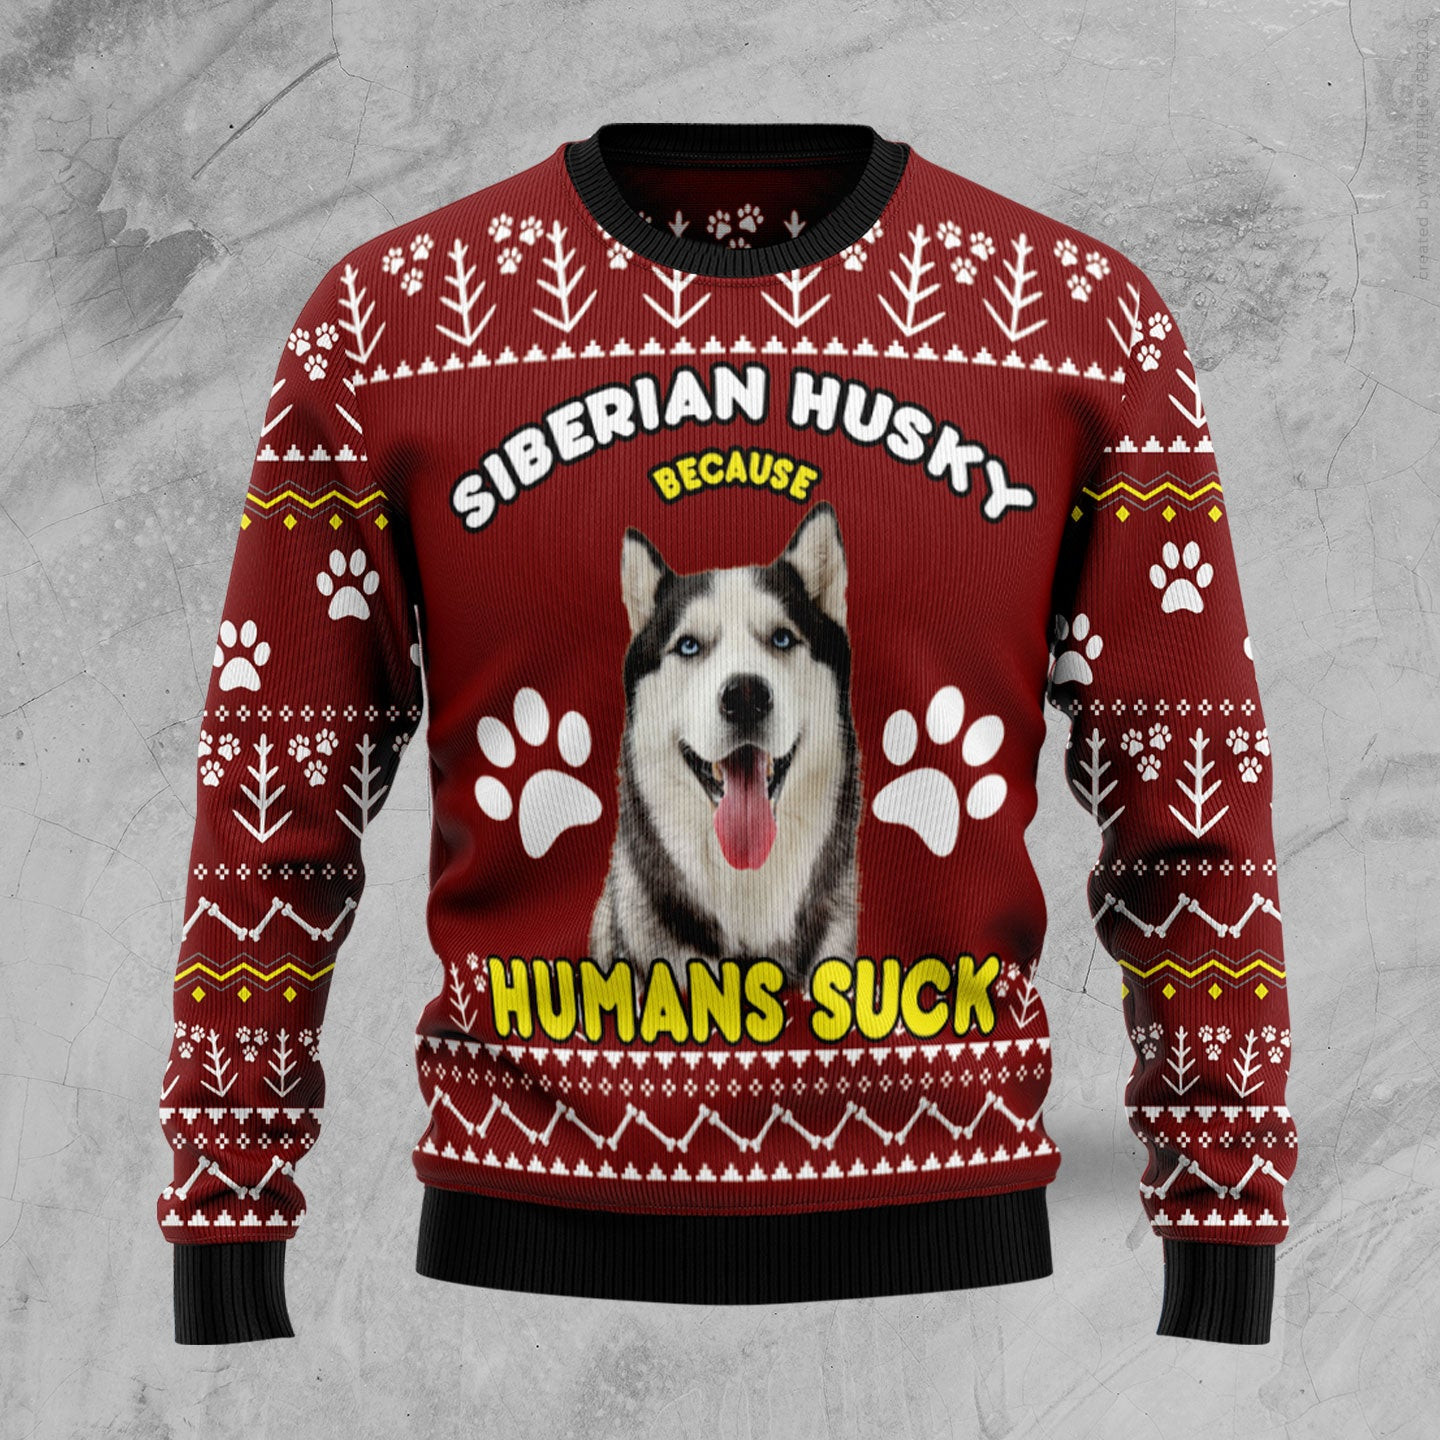 Siberian Husky Because Humans Suck Ugly Christmas Sweater, Ugly Sweater For Men Women, Holiday Sweater